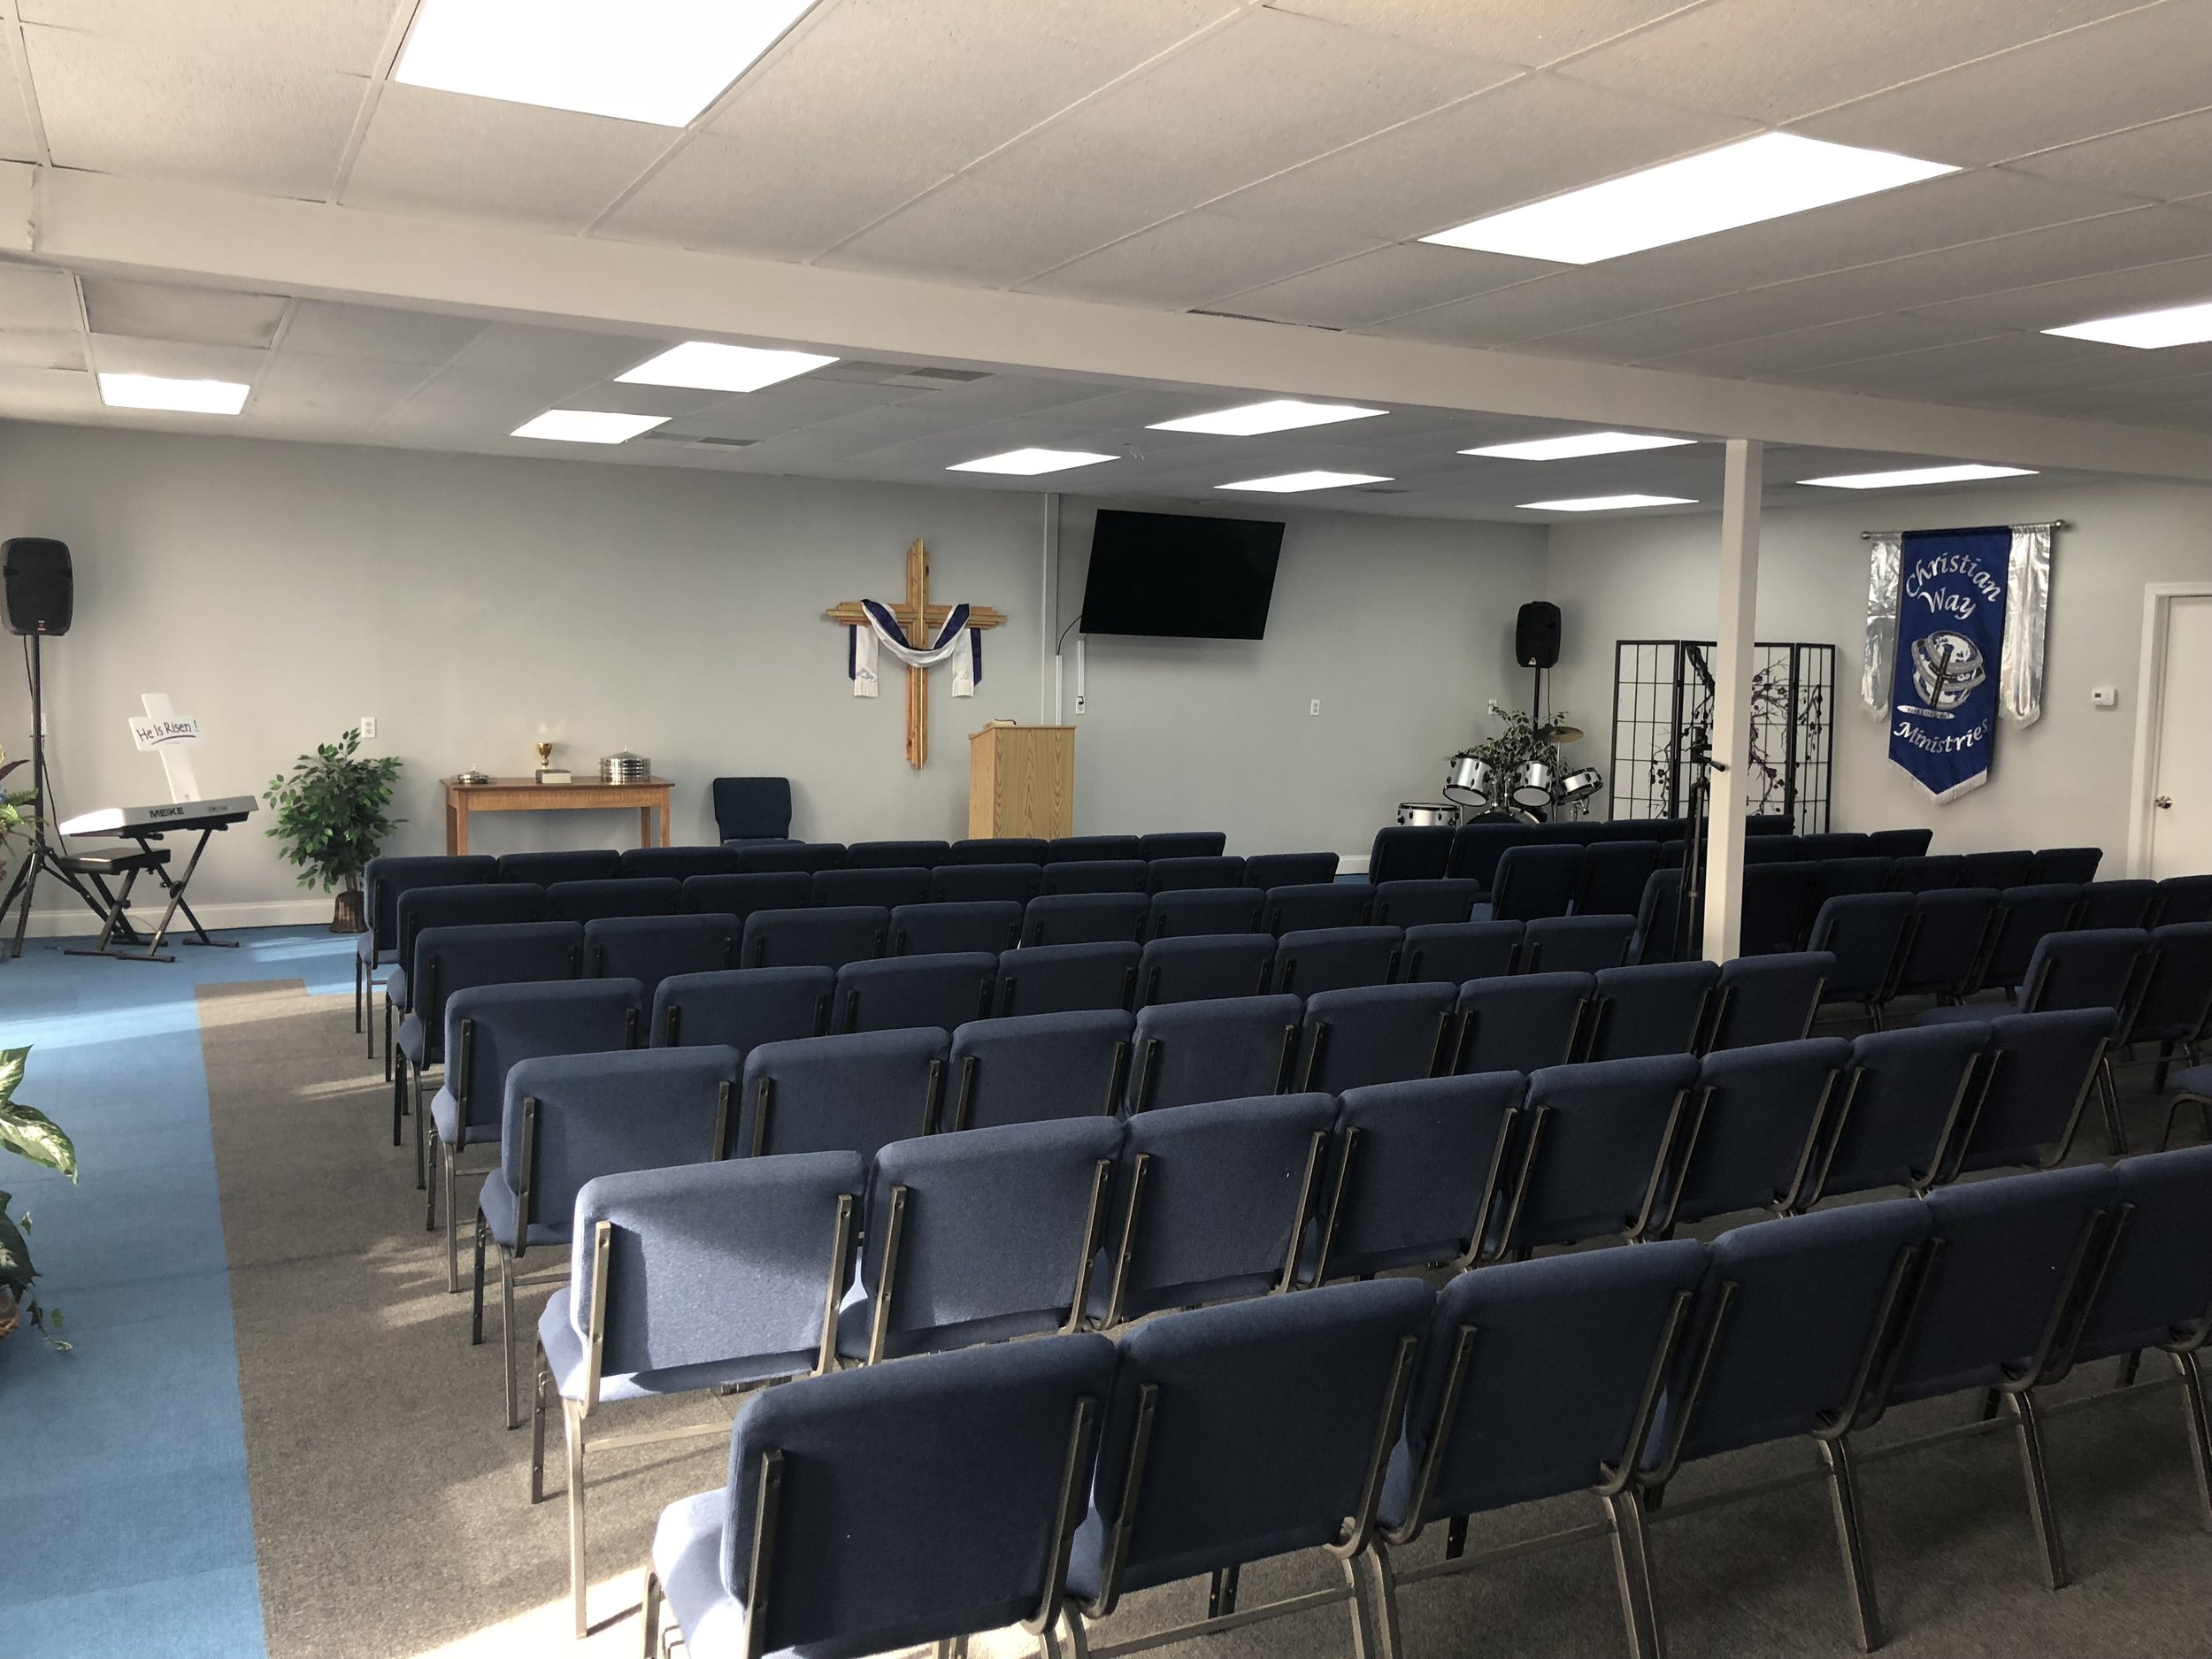 Our New Church Home!